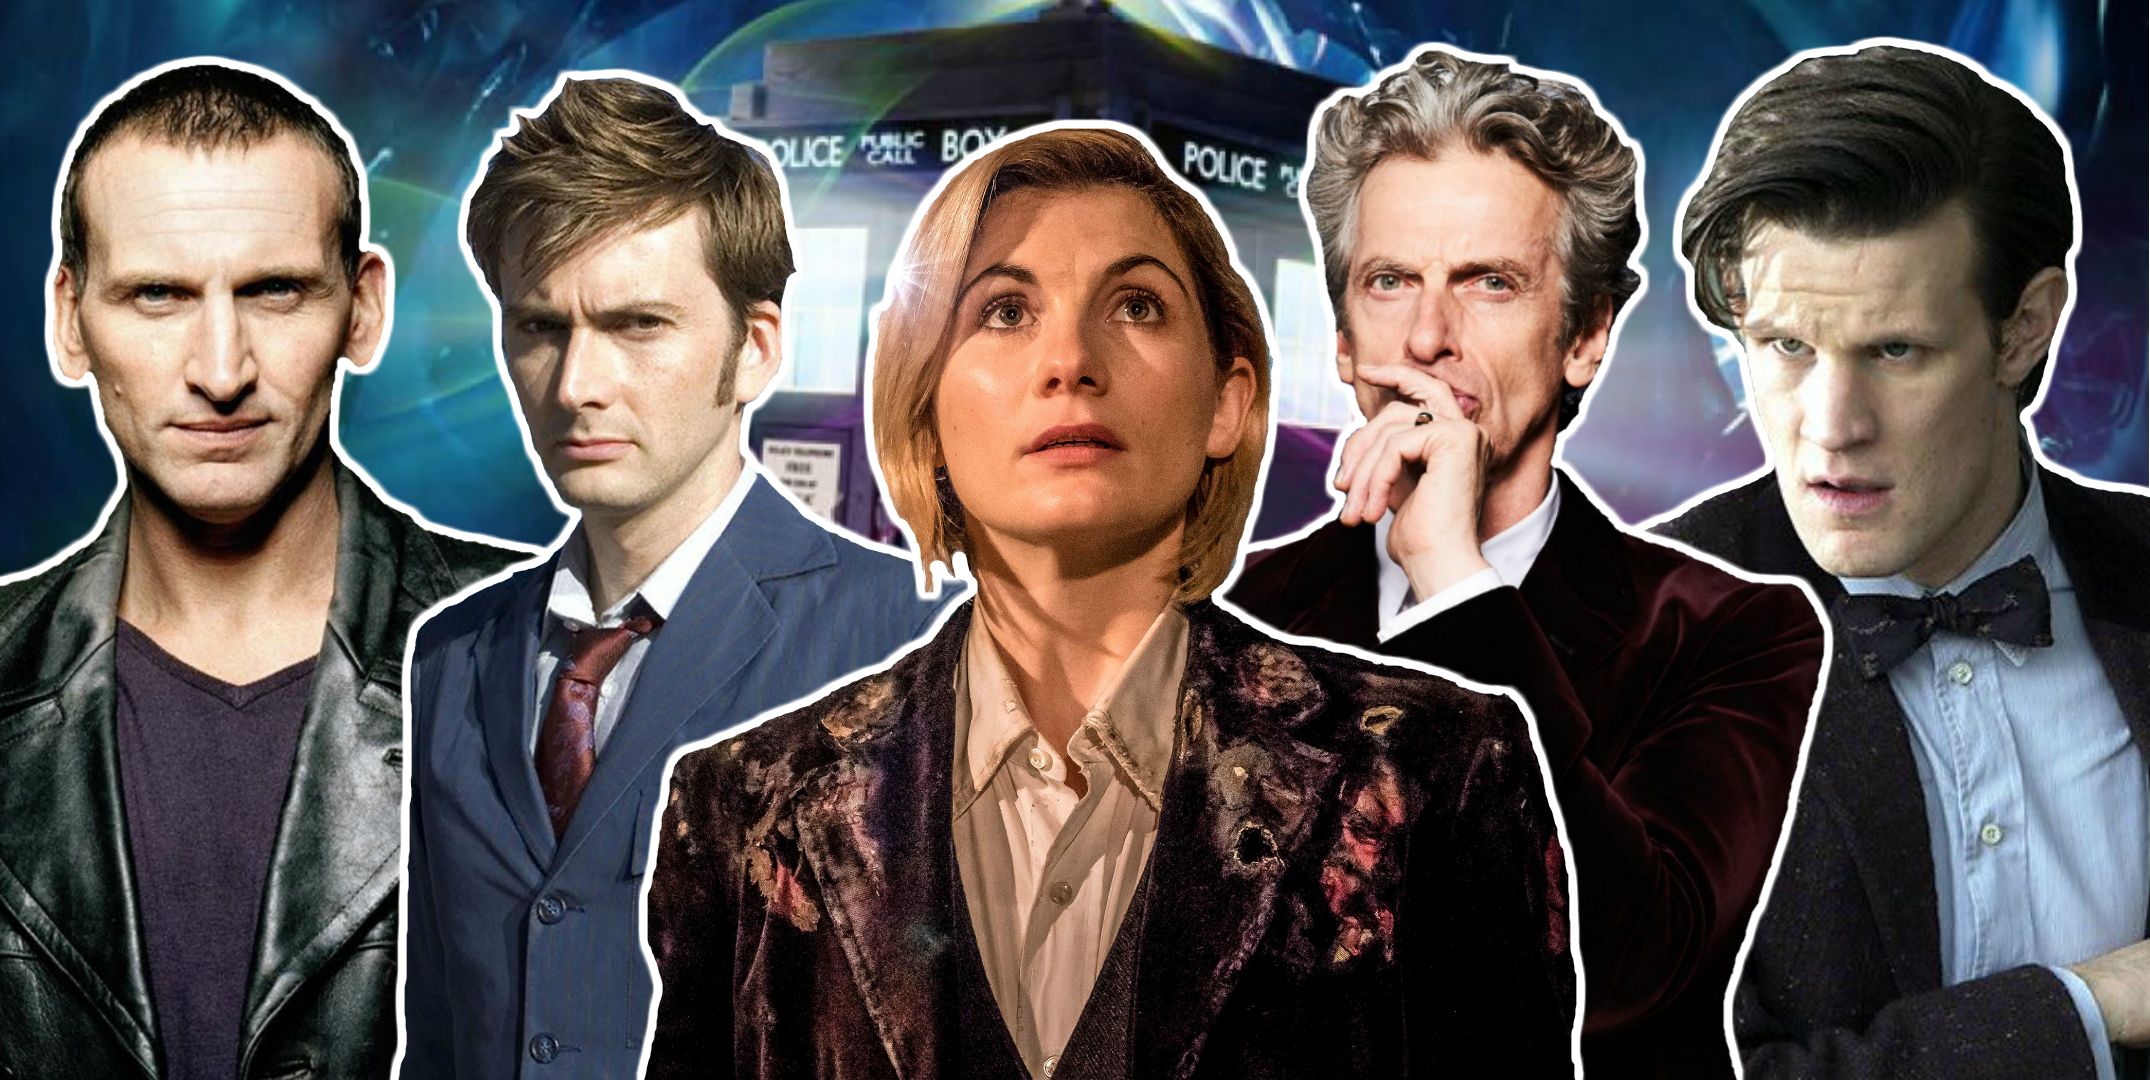 Doctor Who: Who is the greatest Doctor of all?